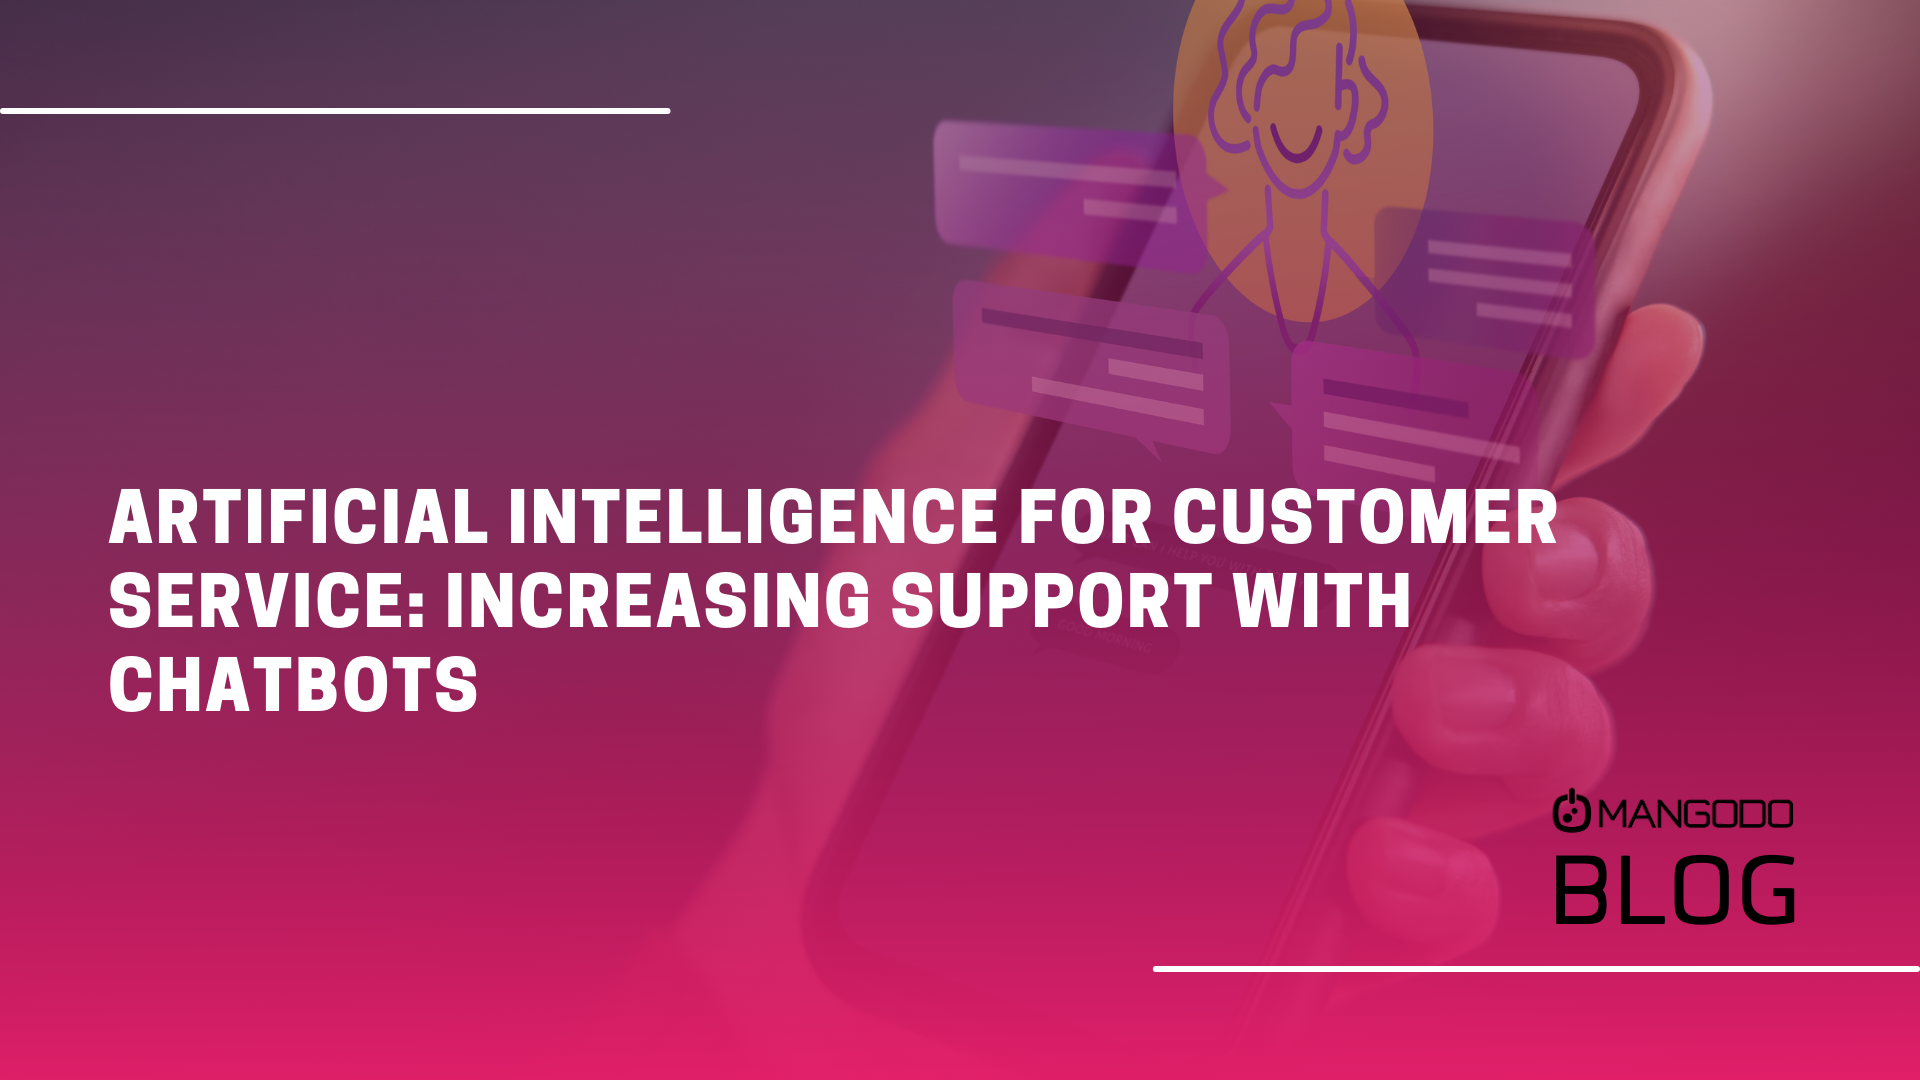 Artificial Intelligence for Customer Service: Increasing Support with Chatbots